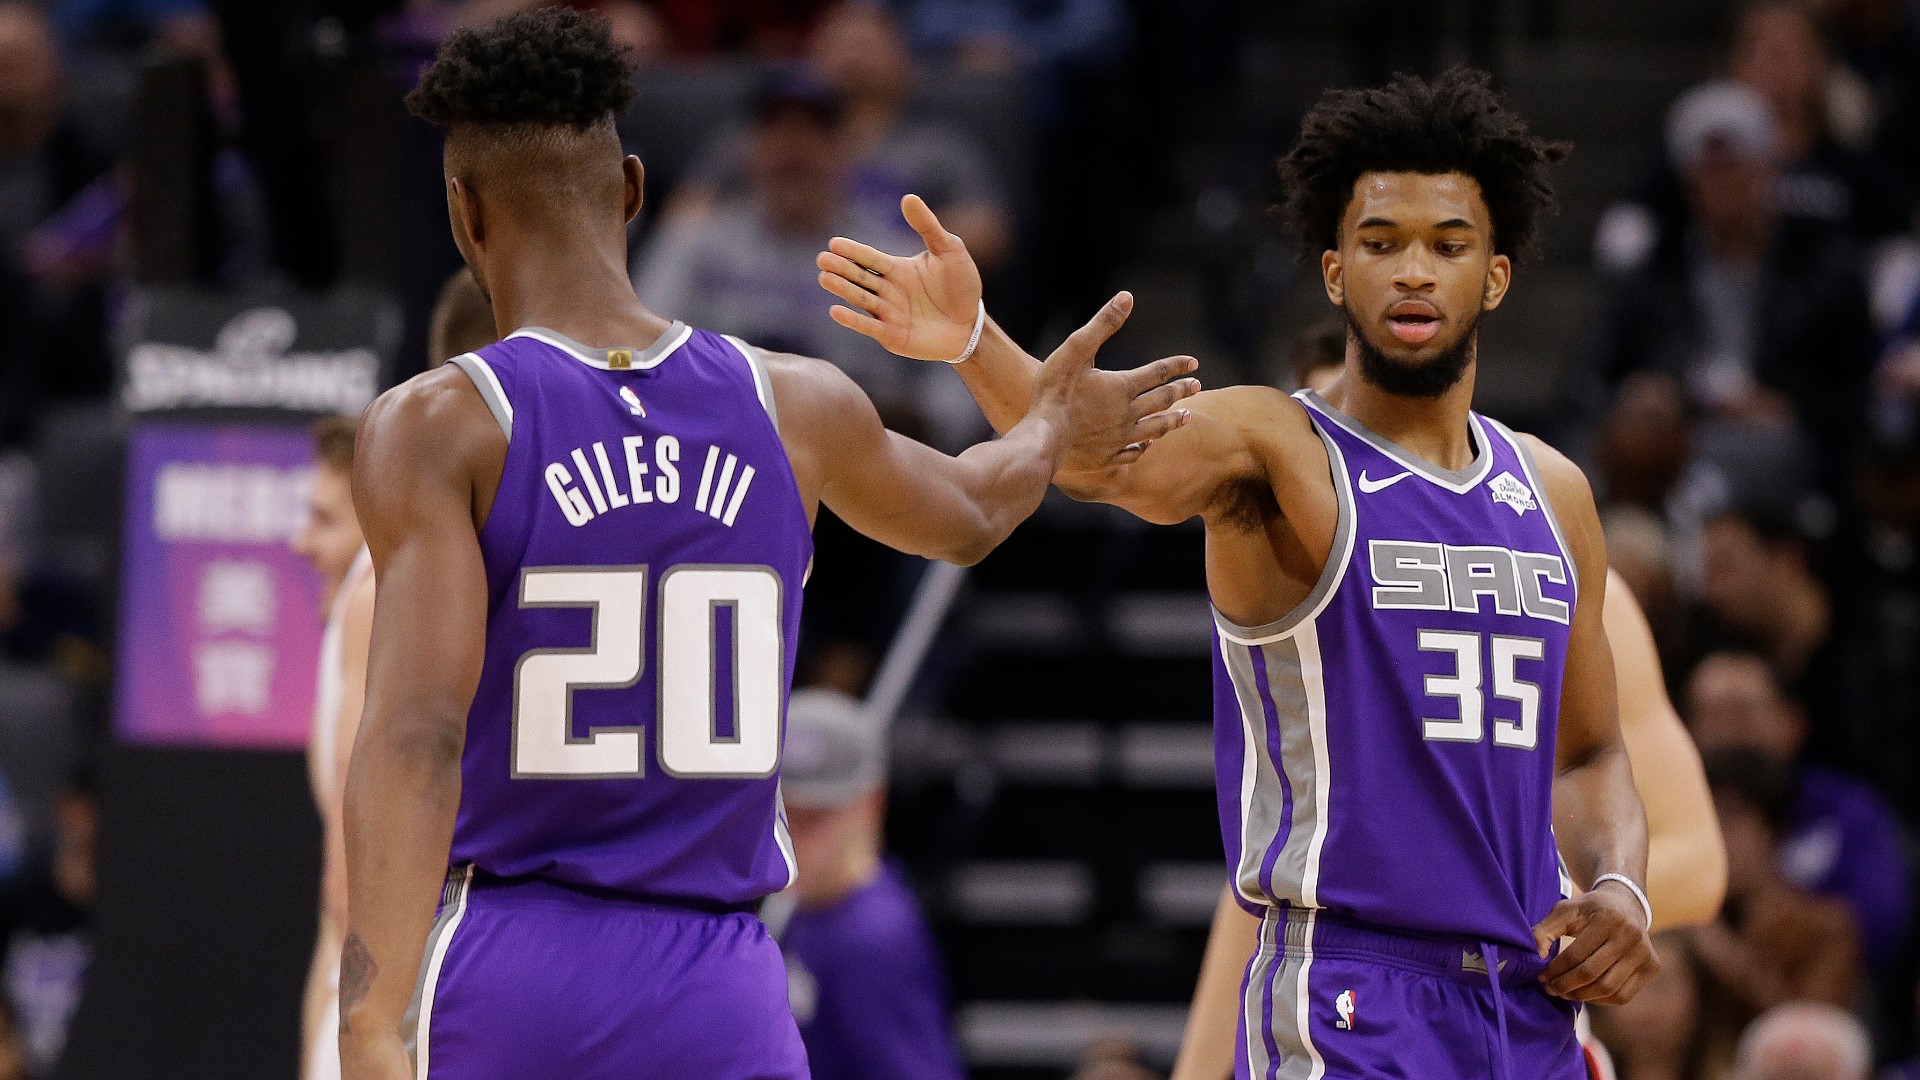 In Sunday's 129-102 romp over the Chicago Bulls, the Sacramento Kings snapped a three-game losing skid and found a glimpse into their future, as Harry Giles and Marvin Bagley III provided a huge spark off the bench to combine for 37 points, 15 rebounds and four blocks in the victory.